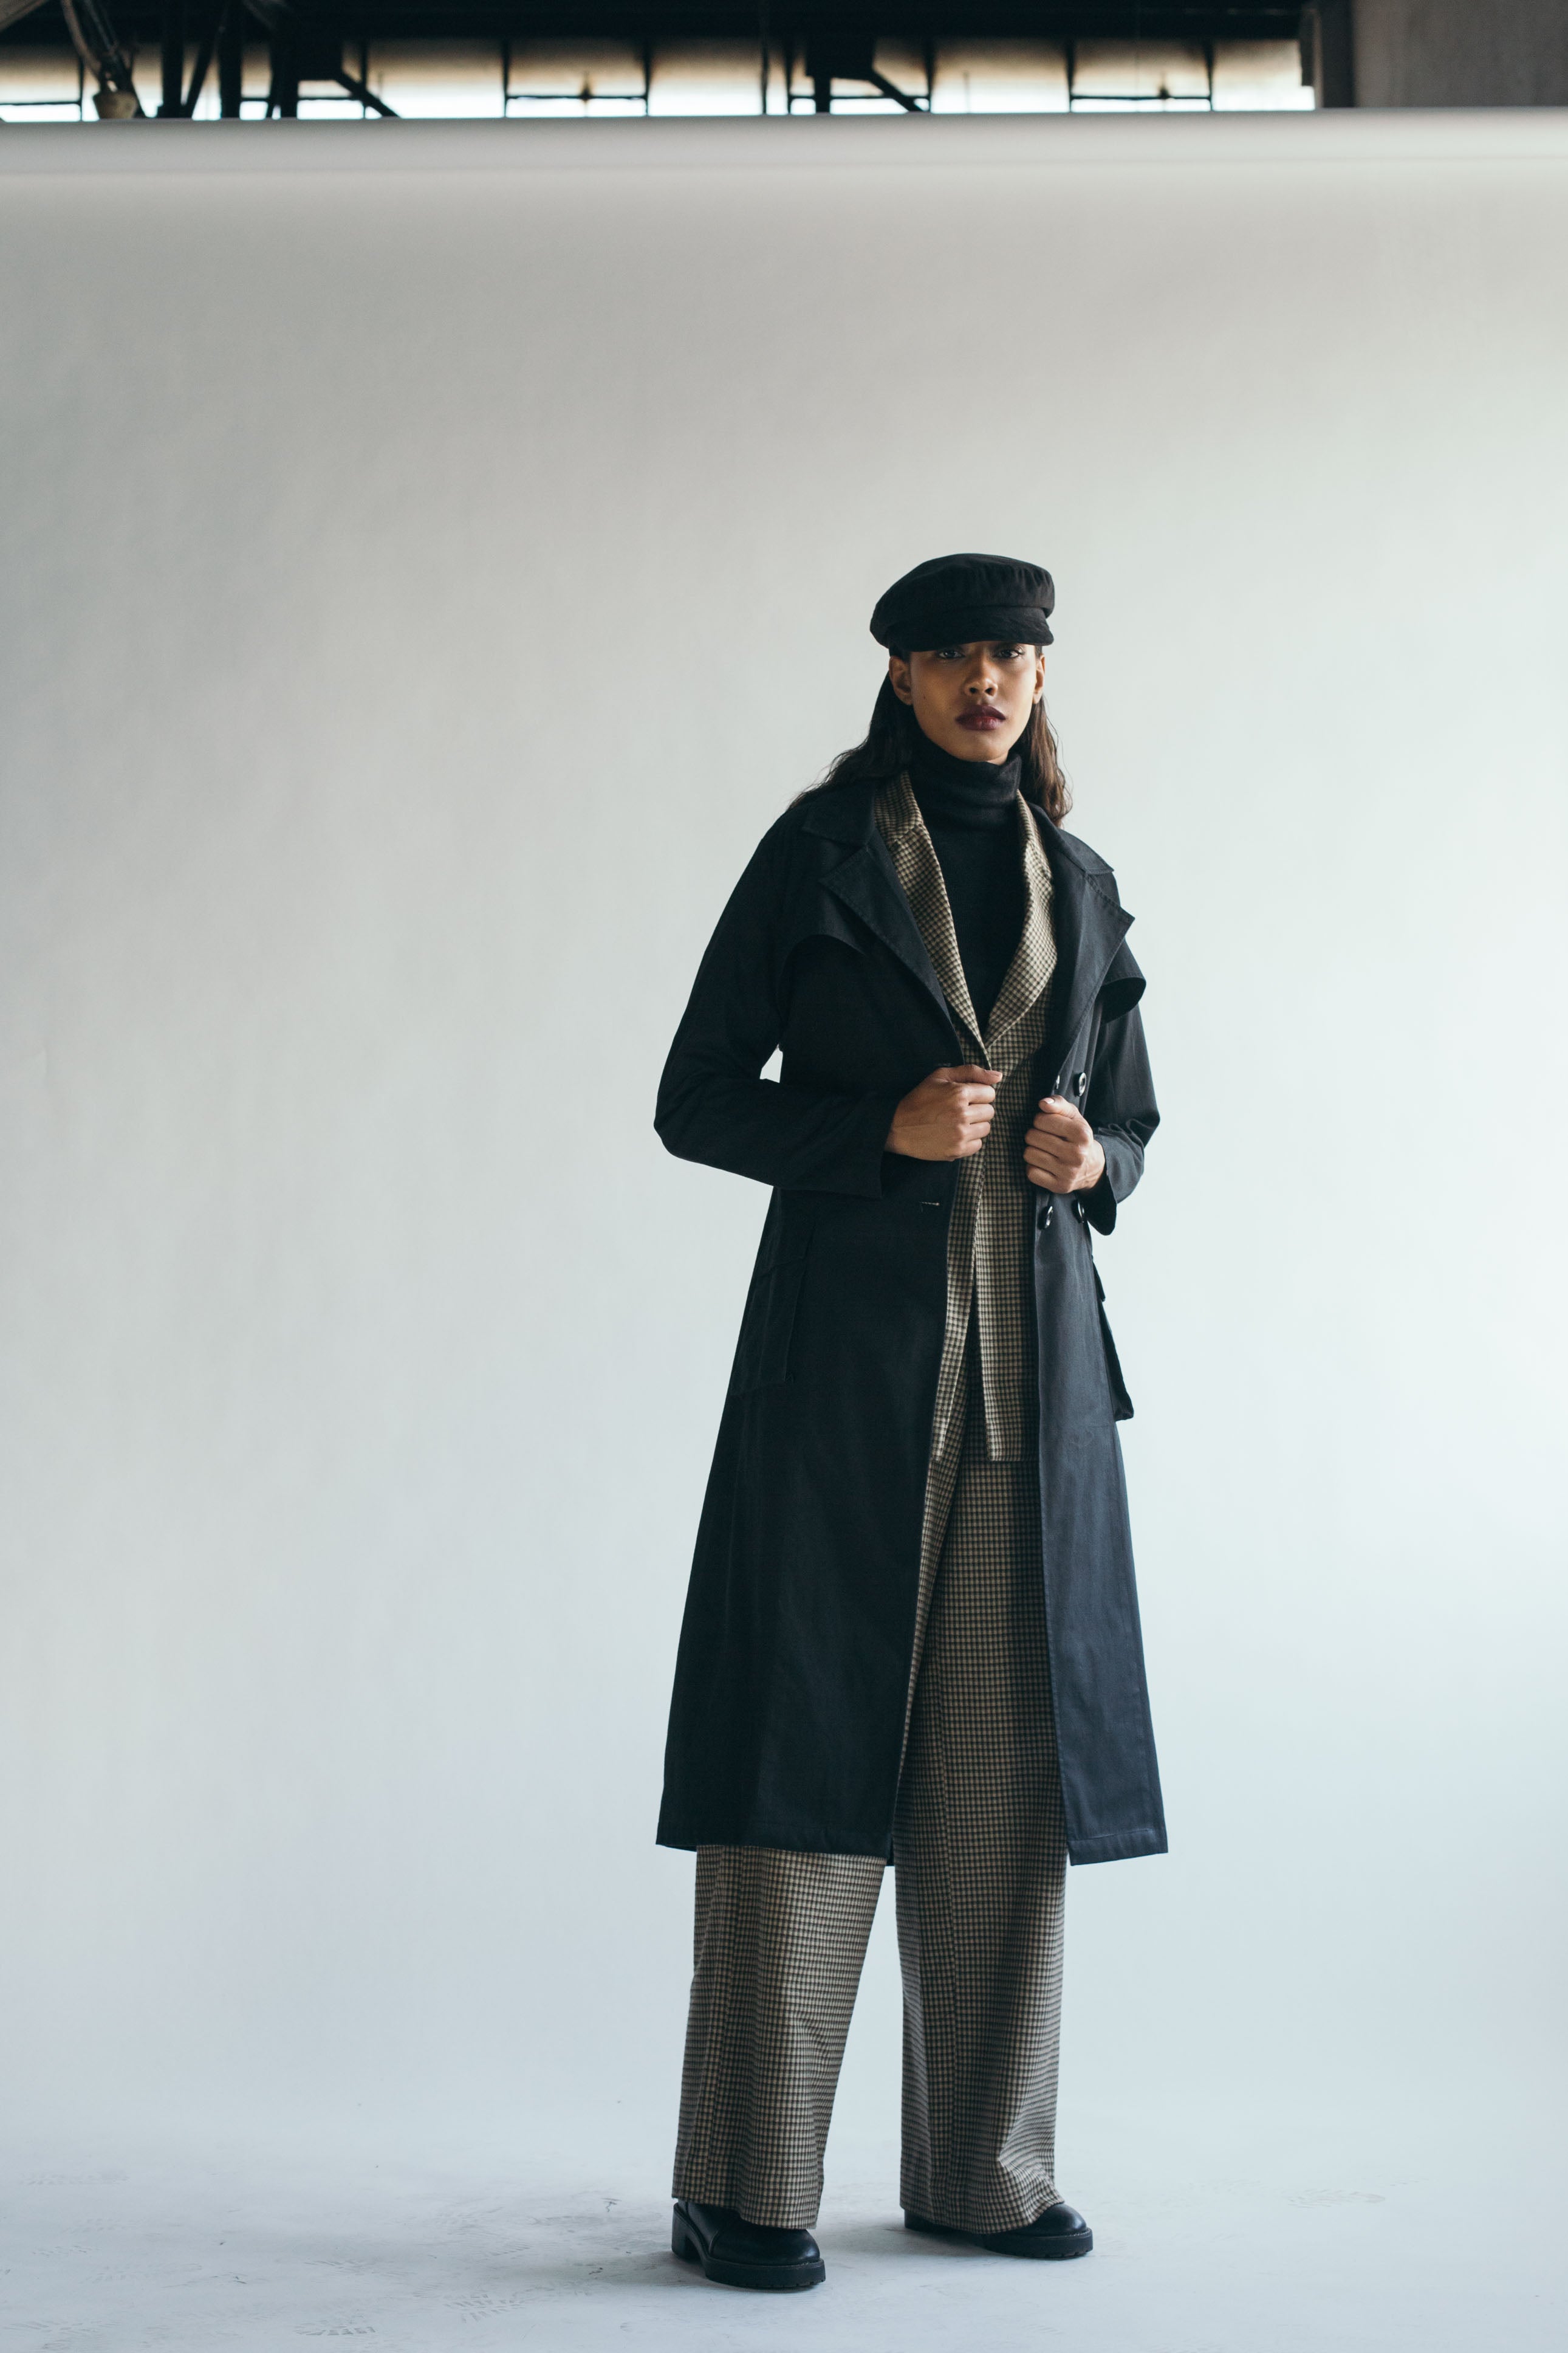 The Charcoal Trench